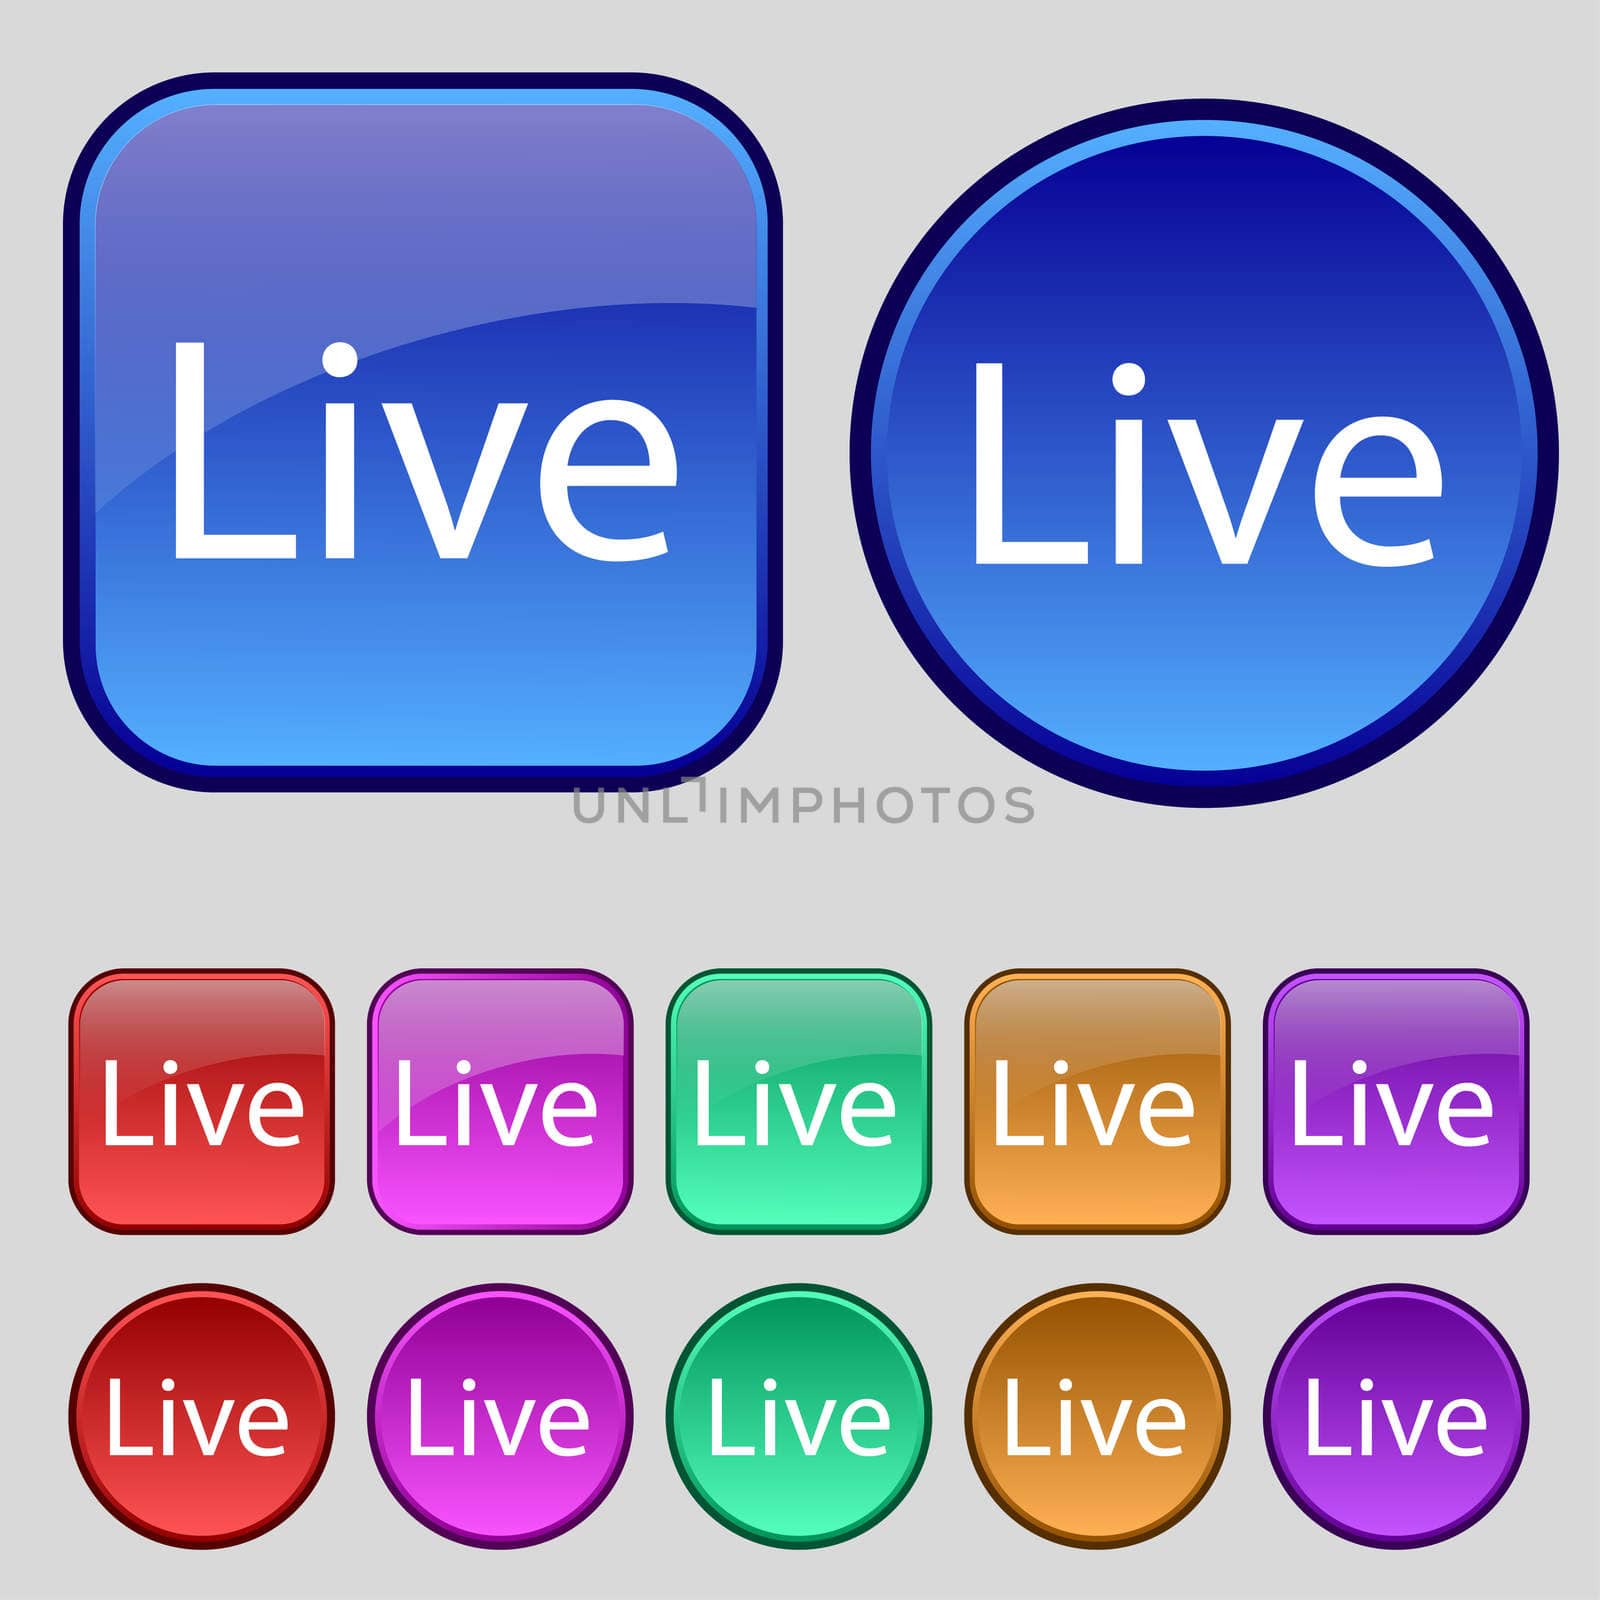 Live sign icon. Set of colored buttons. illustration